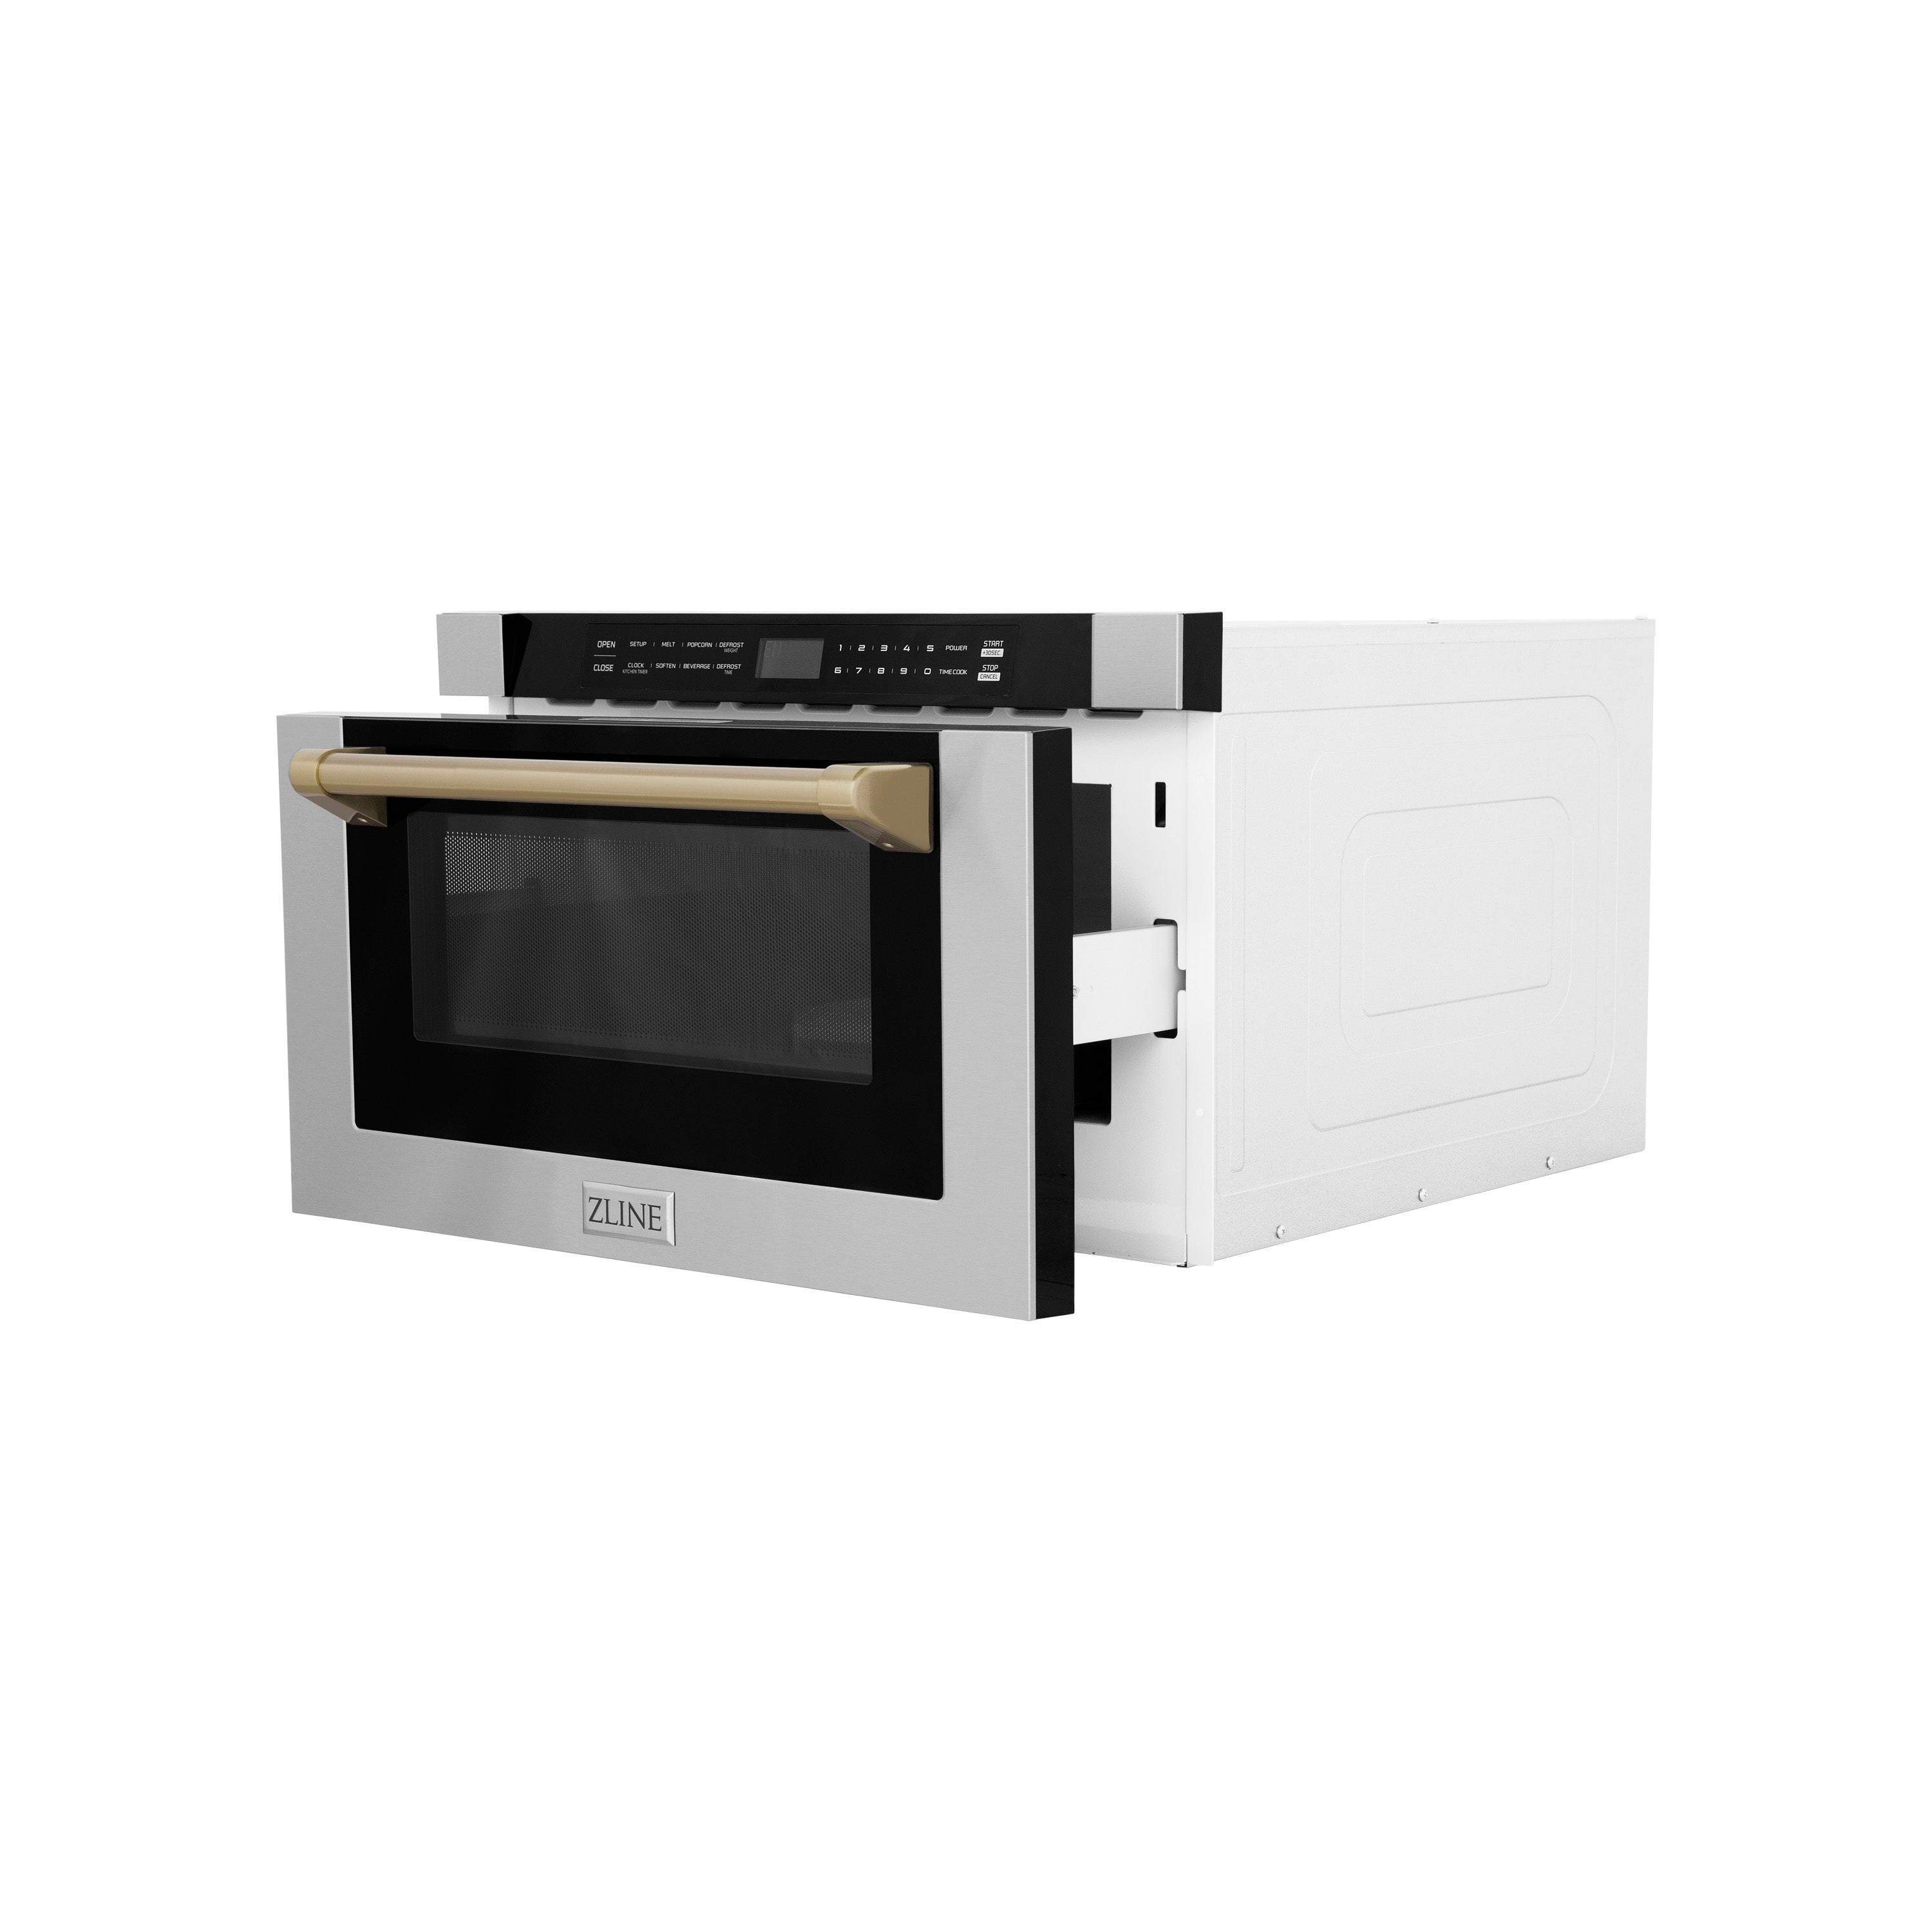 ZLINE Autograph Edition 24 in. 1.2 cu. ft. Built-in Microwave Drawer with a Traditional Handle in Stainless Steel and Champagne Bronze Accents (MWDZ-1-H-CB) Side View Drawer Open